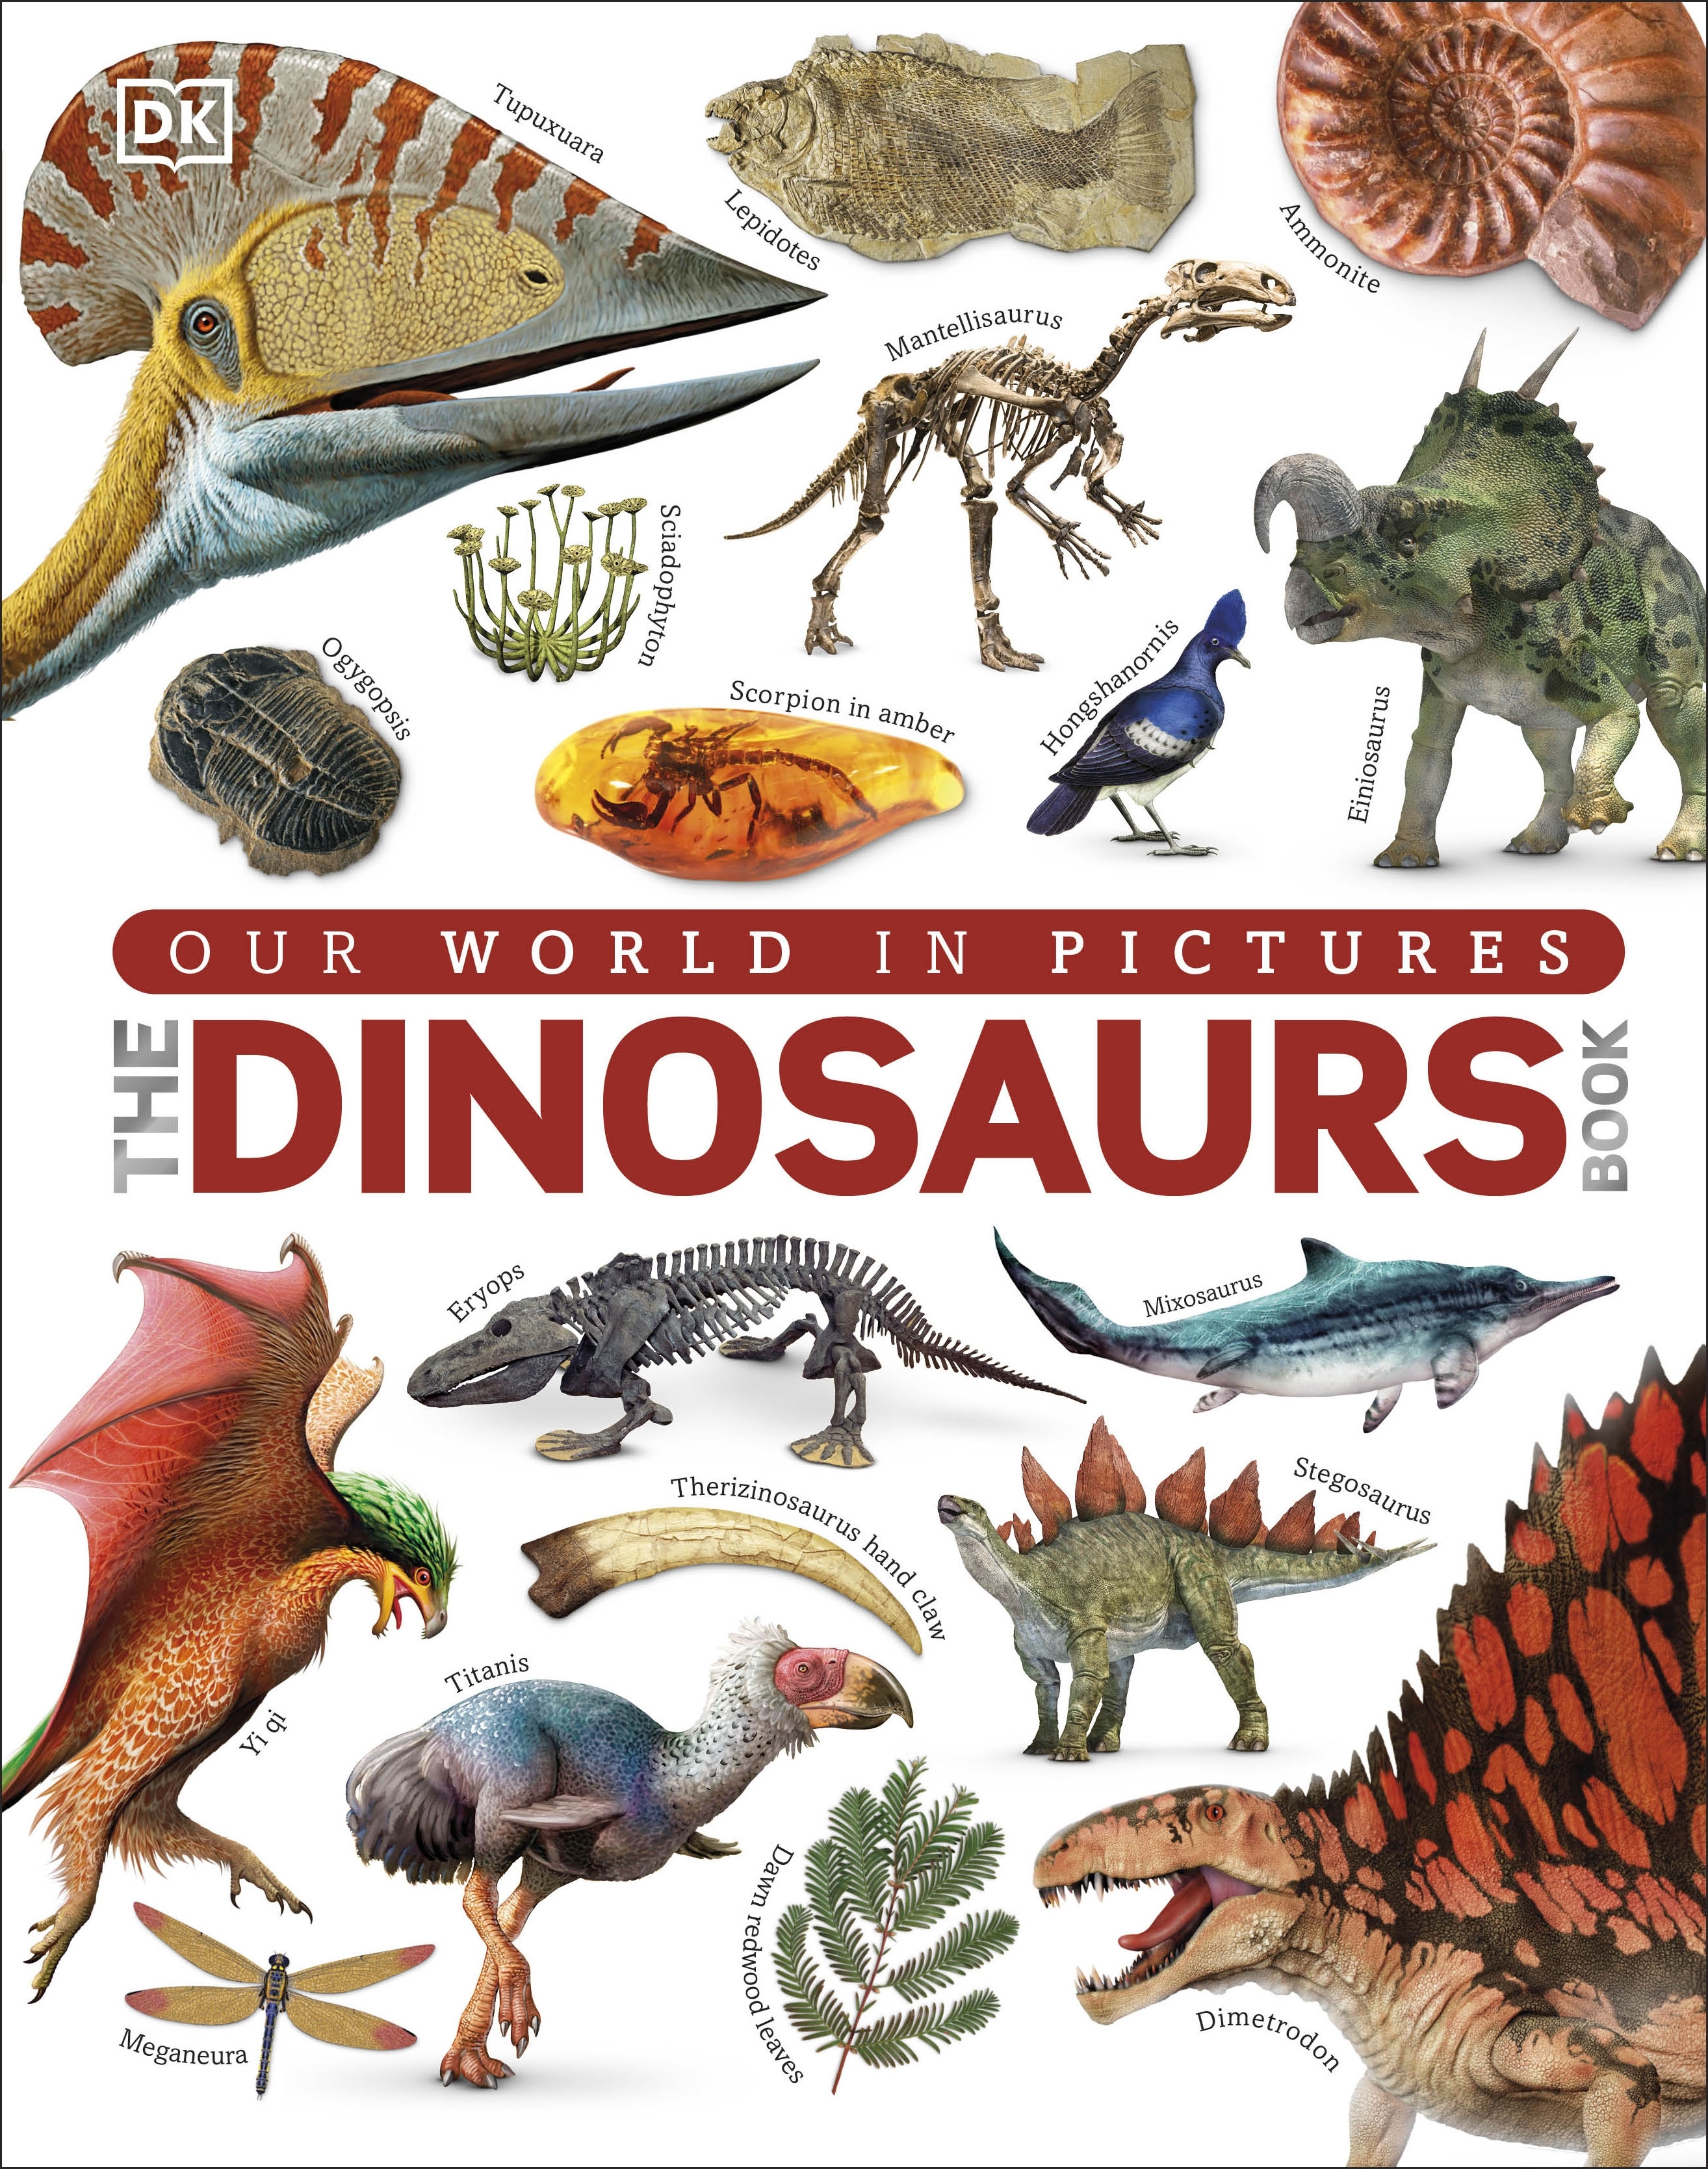 dinosaur-book-review-and-giveaway-rock-and-drool-rock-and-drool